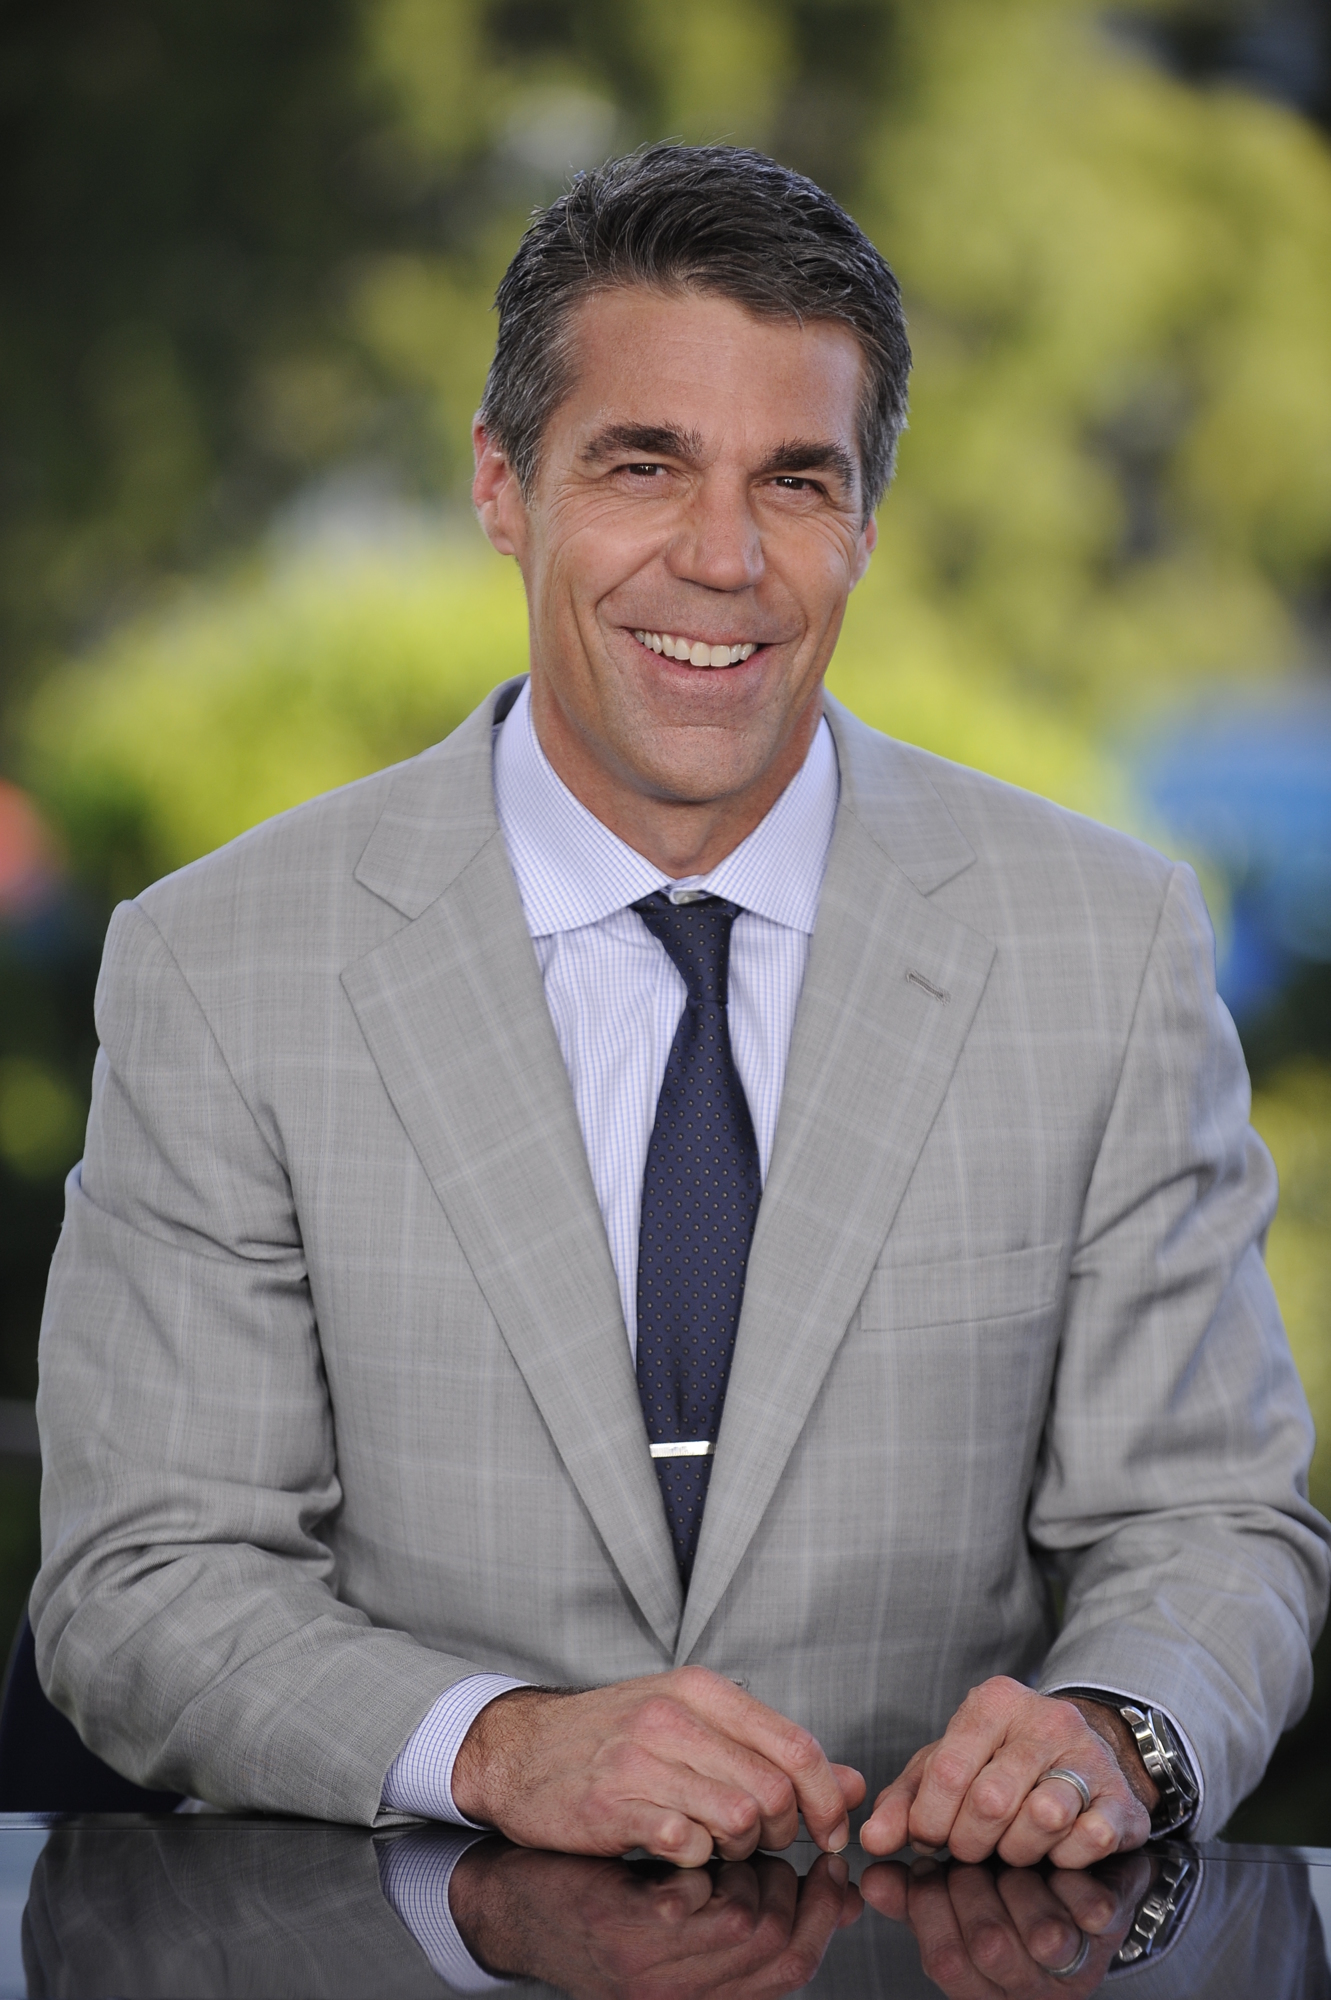 Chris Fowler will be honored at the 14th-annual Dick Vitale Gala. Photo courtesy ESPN.